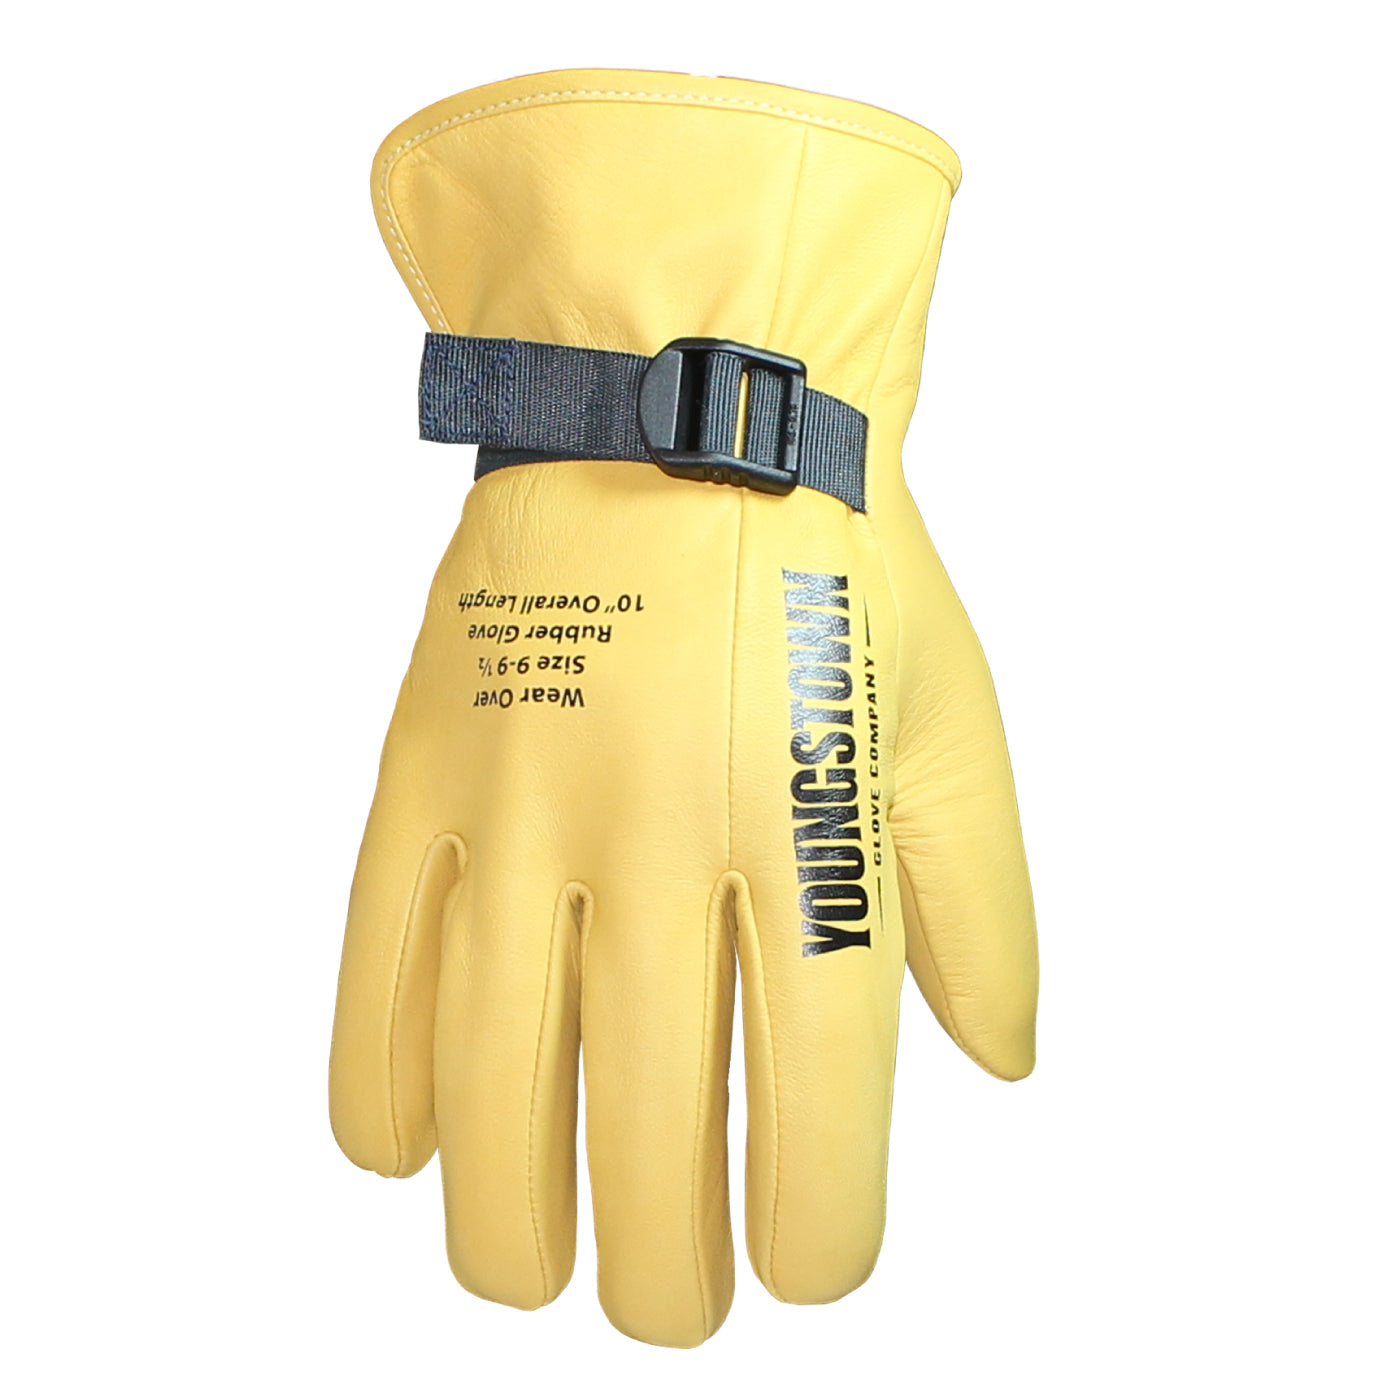 16-4100-10 Youngstown 10" Secondary Leather Protector Glove - Main Image